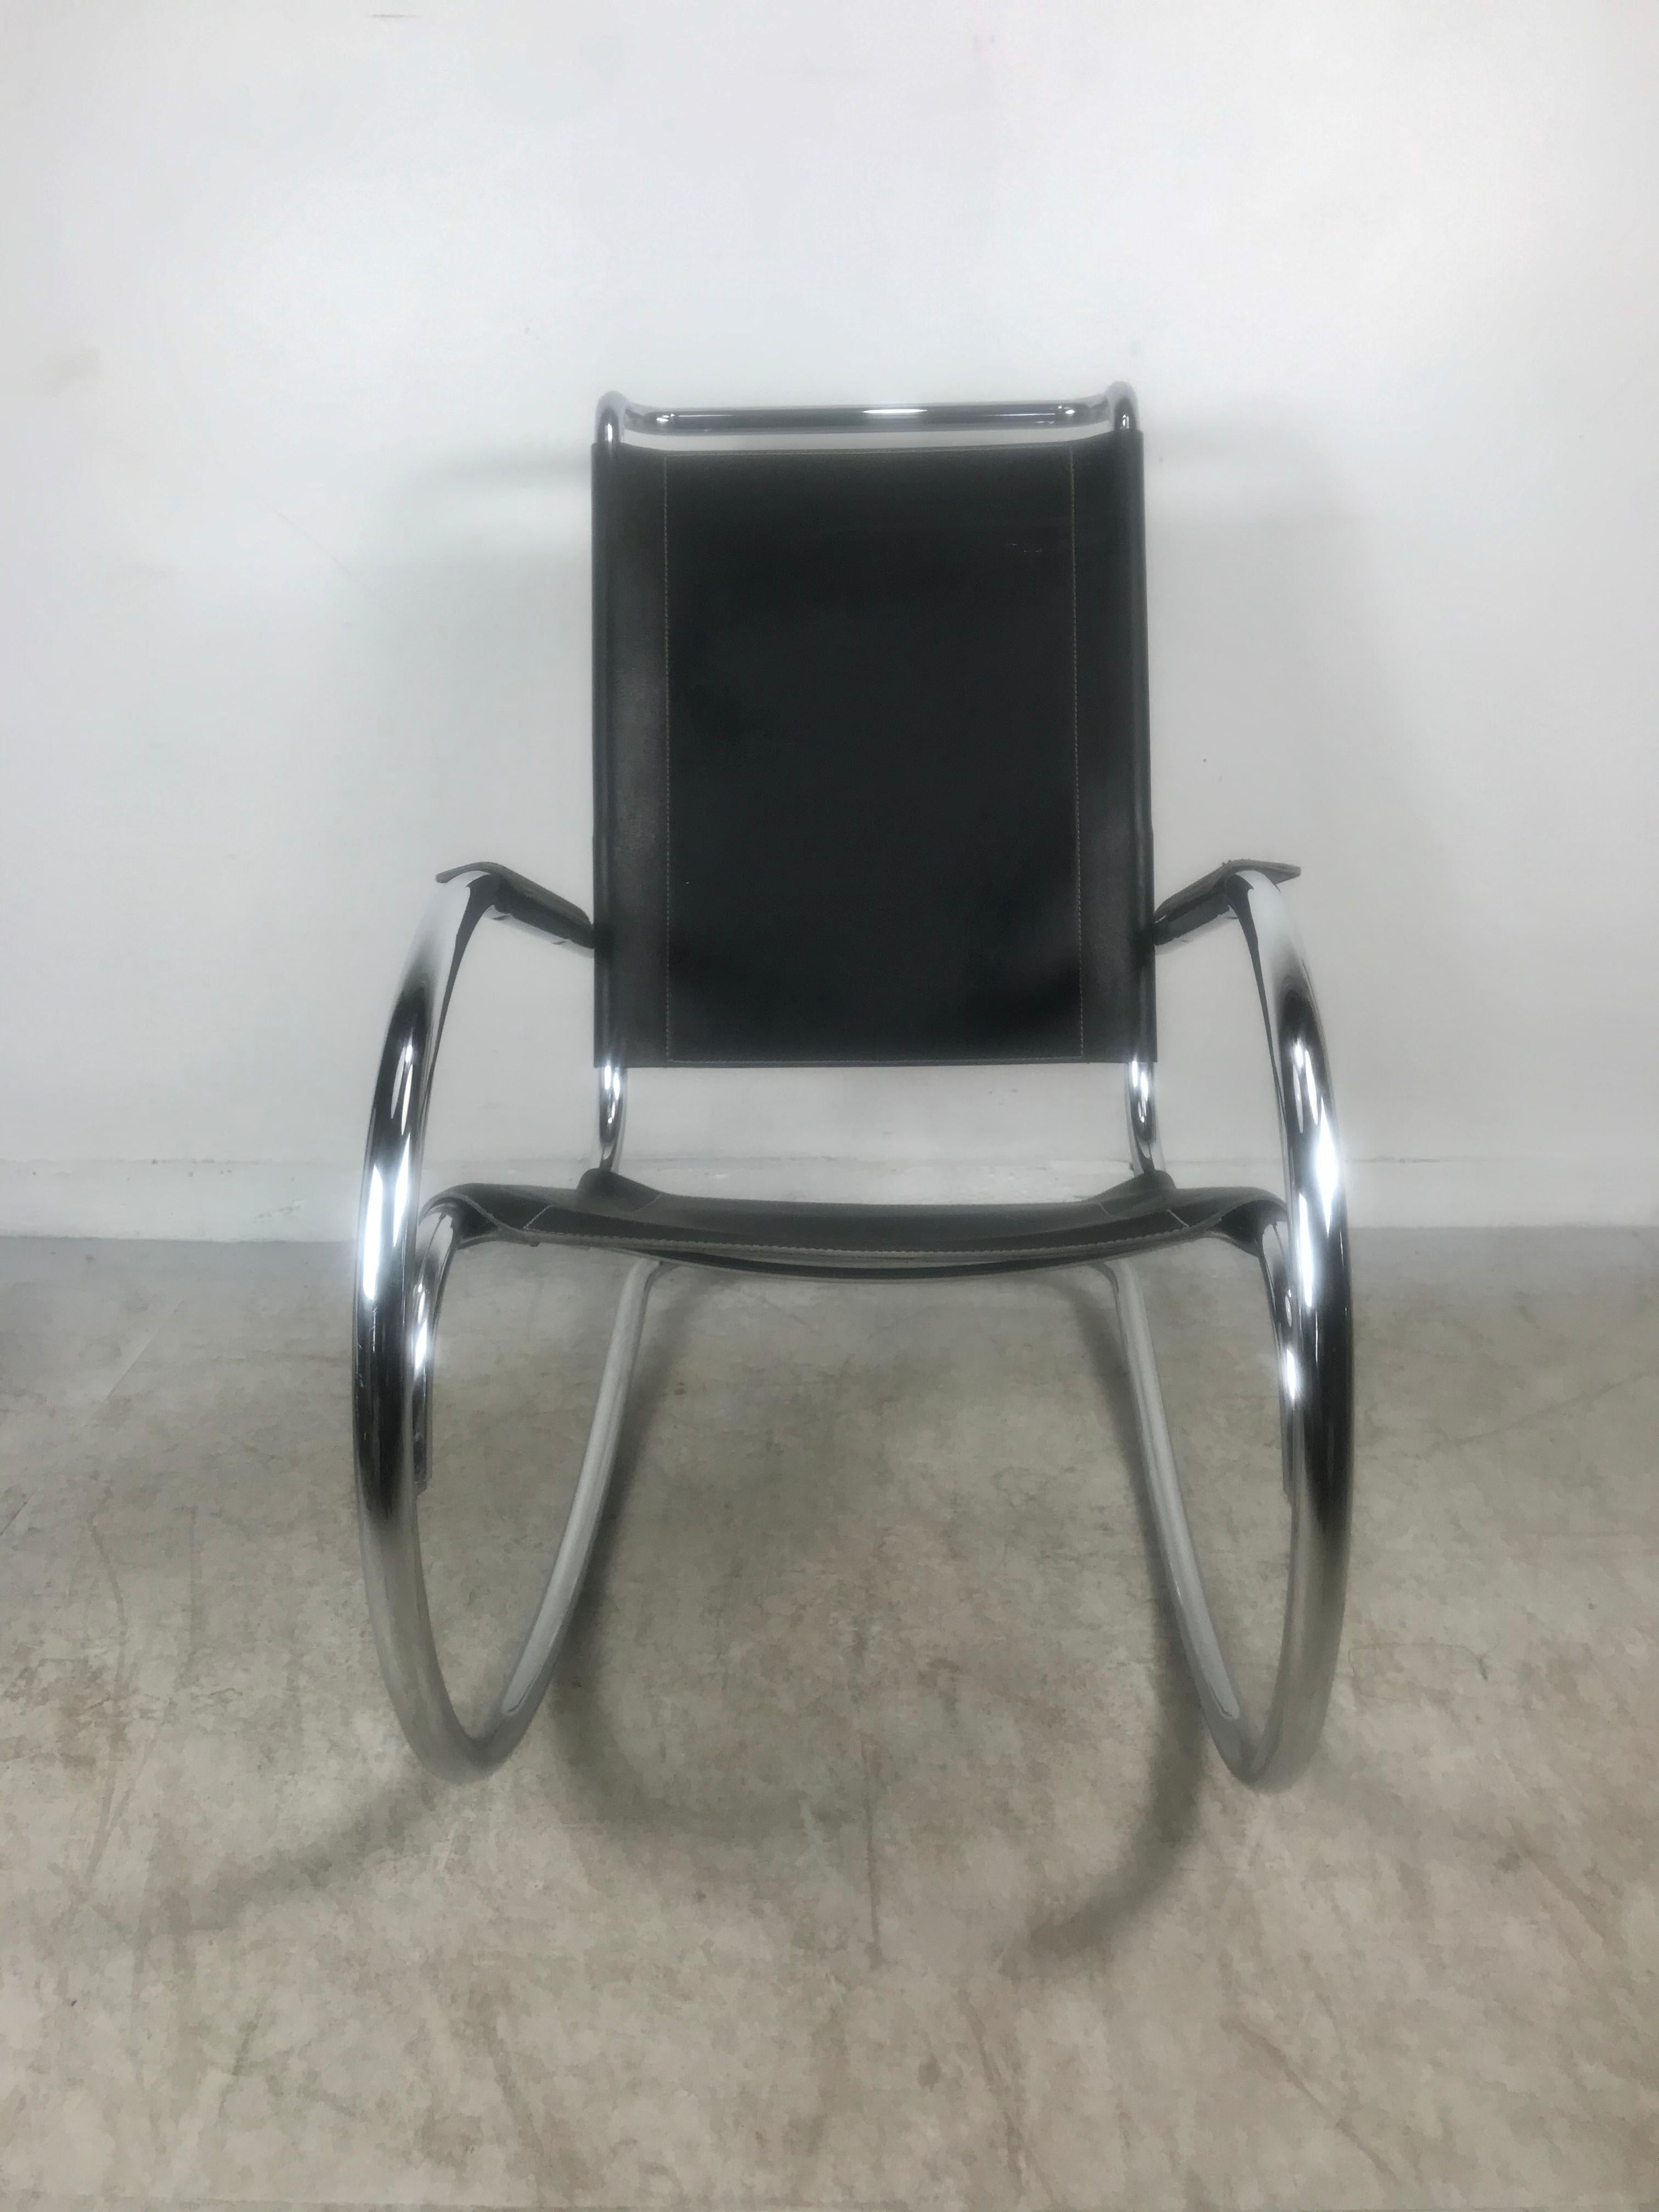 Classic Bauhaus style leather and chrome rocker, after Mies Van De Rohe, made in Italy, wonderful quality and construction, extremely comfortable, retains original MADE IN ITALY label.